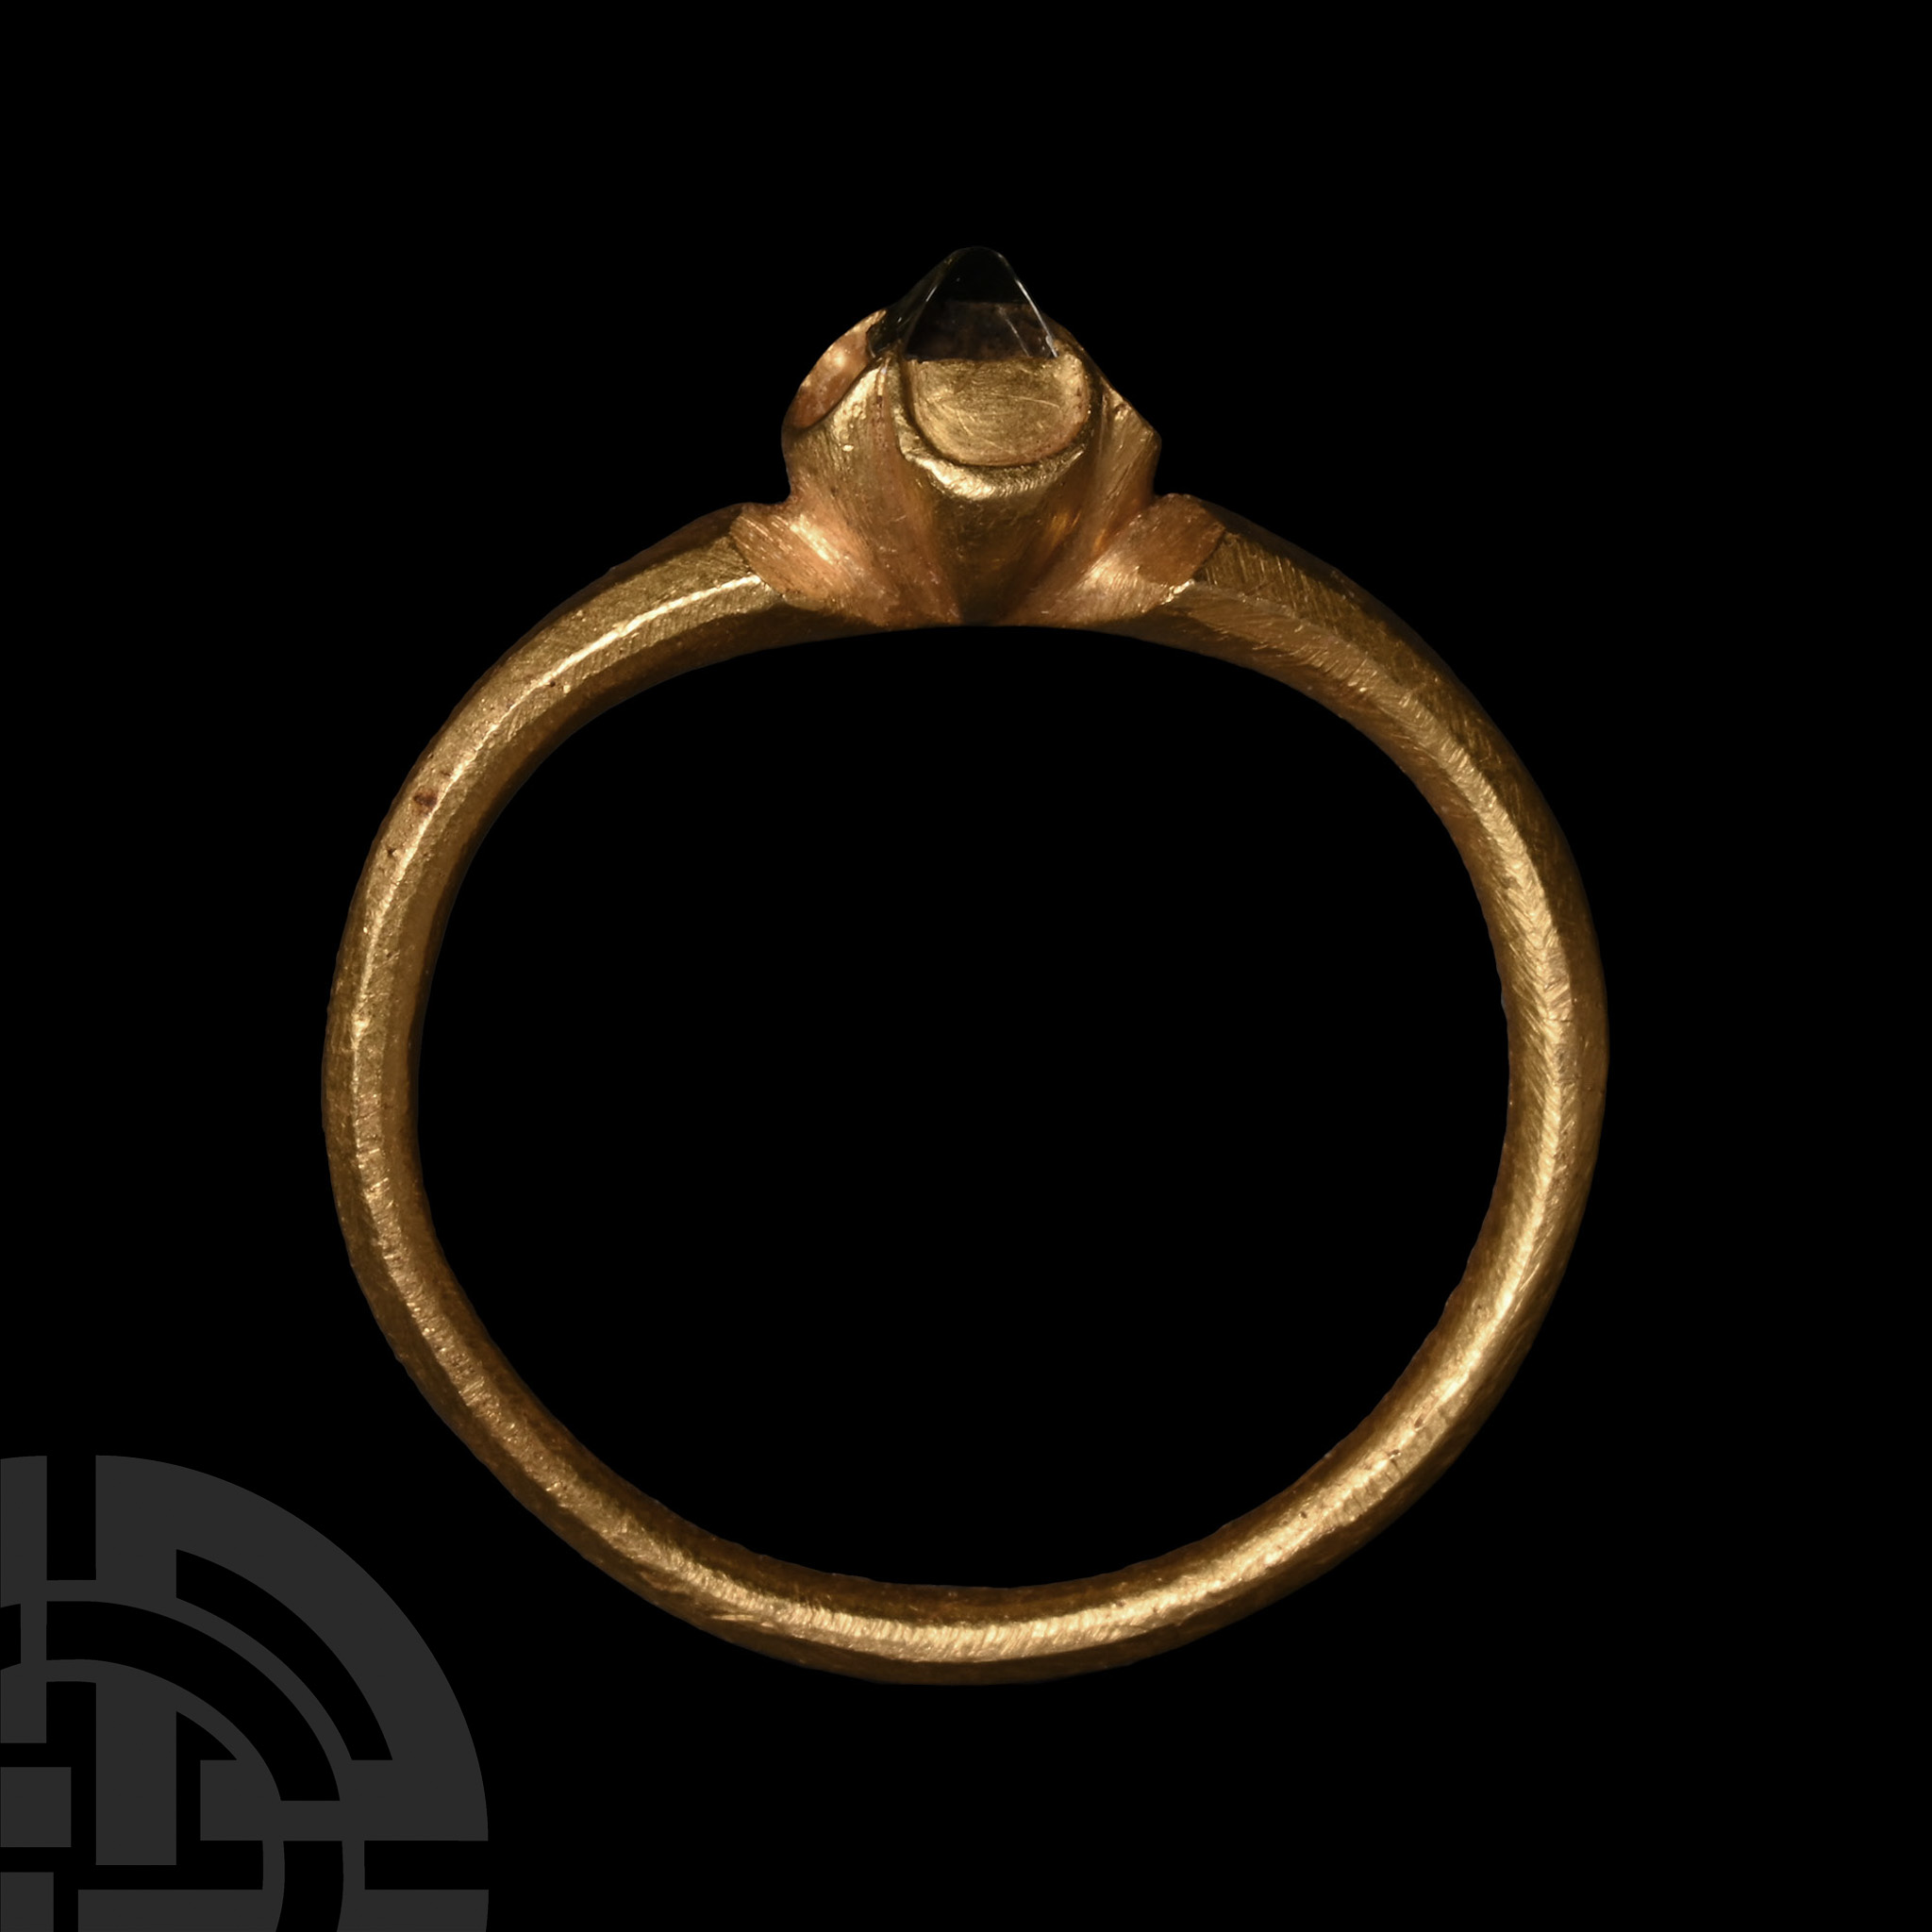 Elizabethan Period Gold Ring with Natural Diamond Crystal - Image 2 of 2